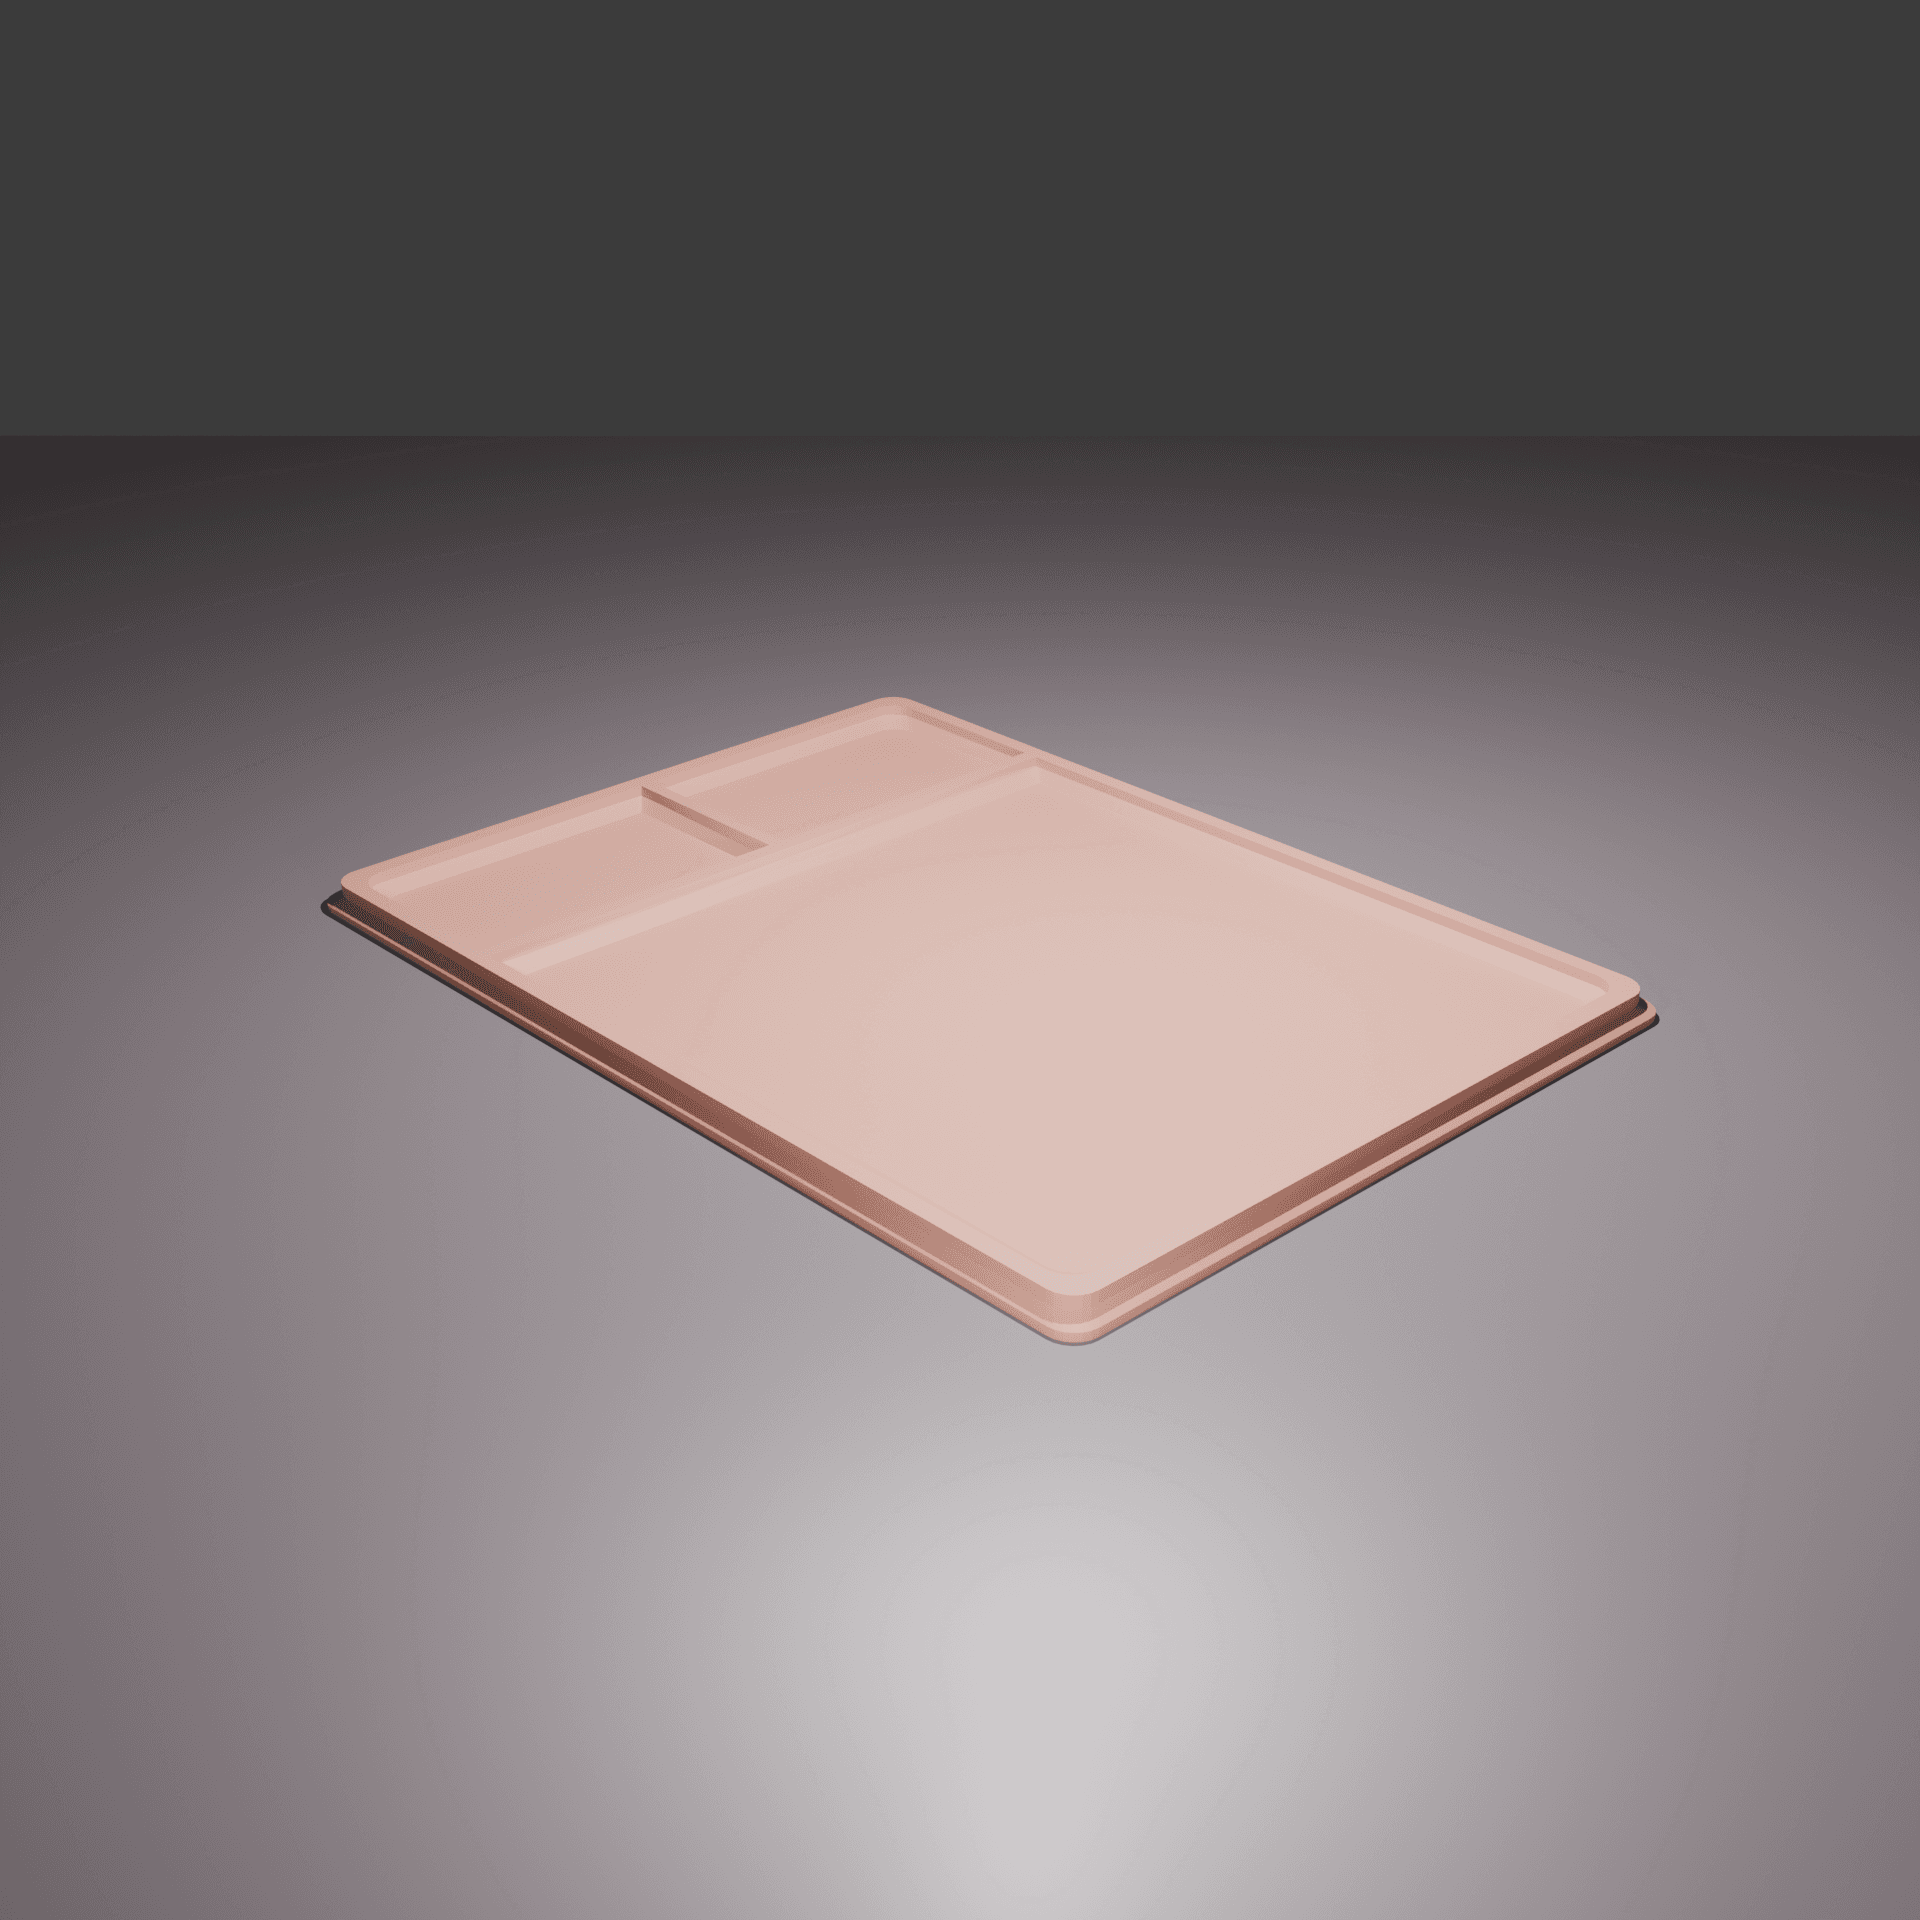 Crafting Tray C 3d model